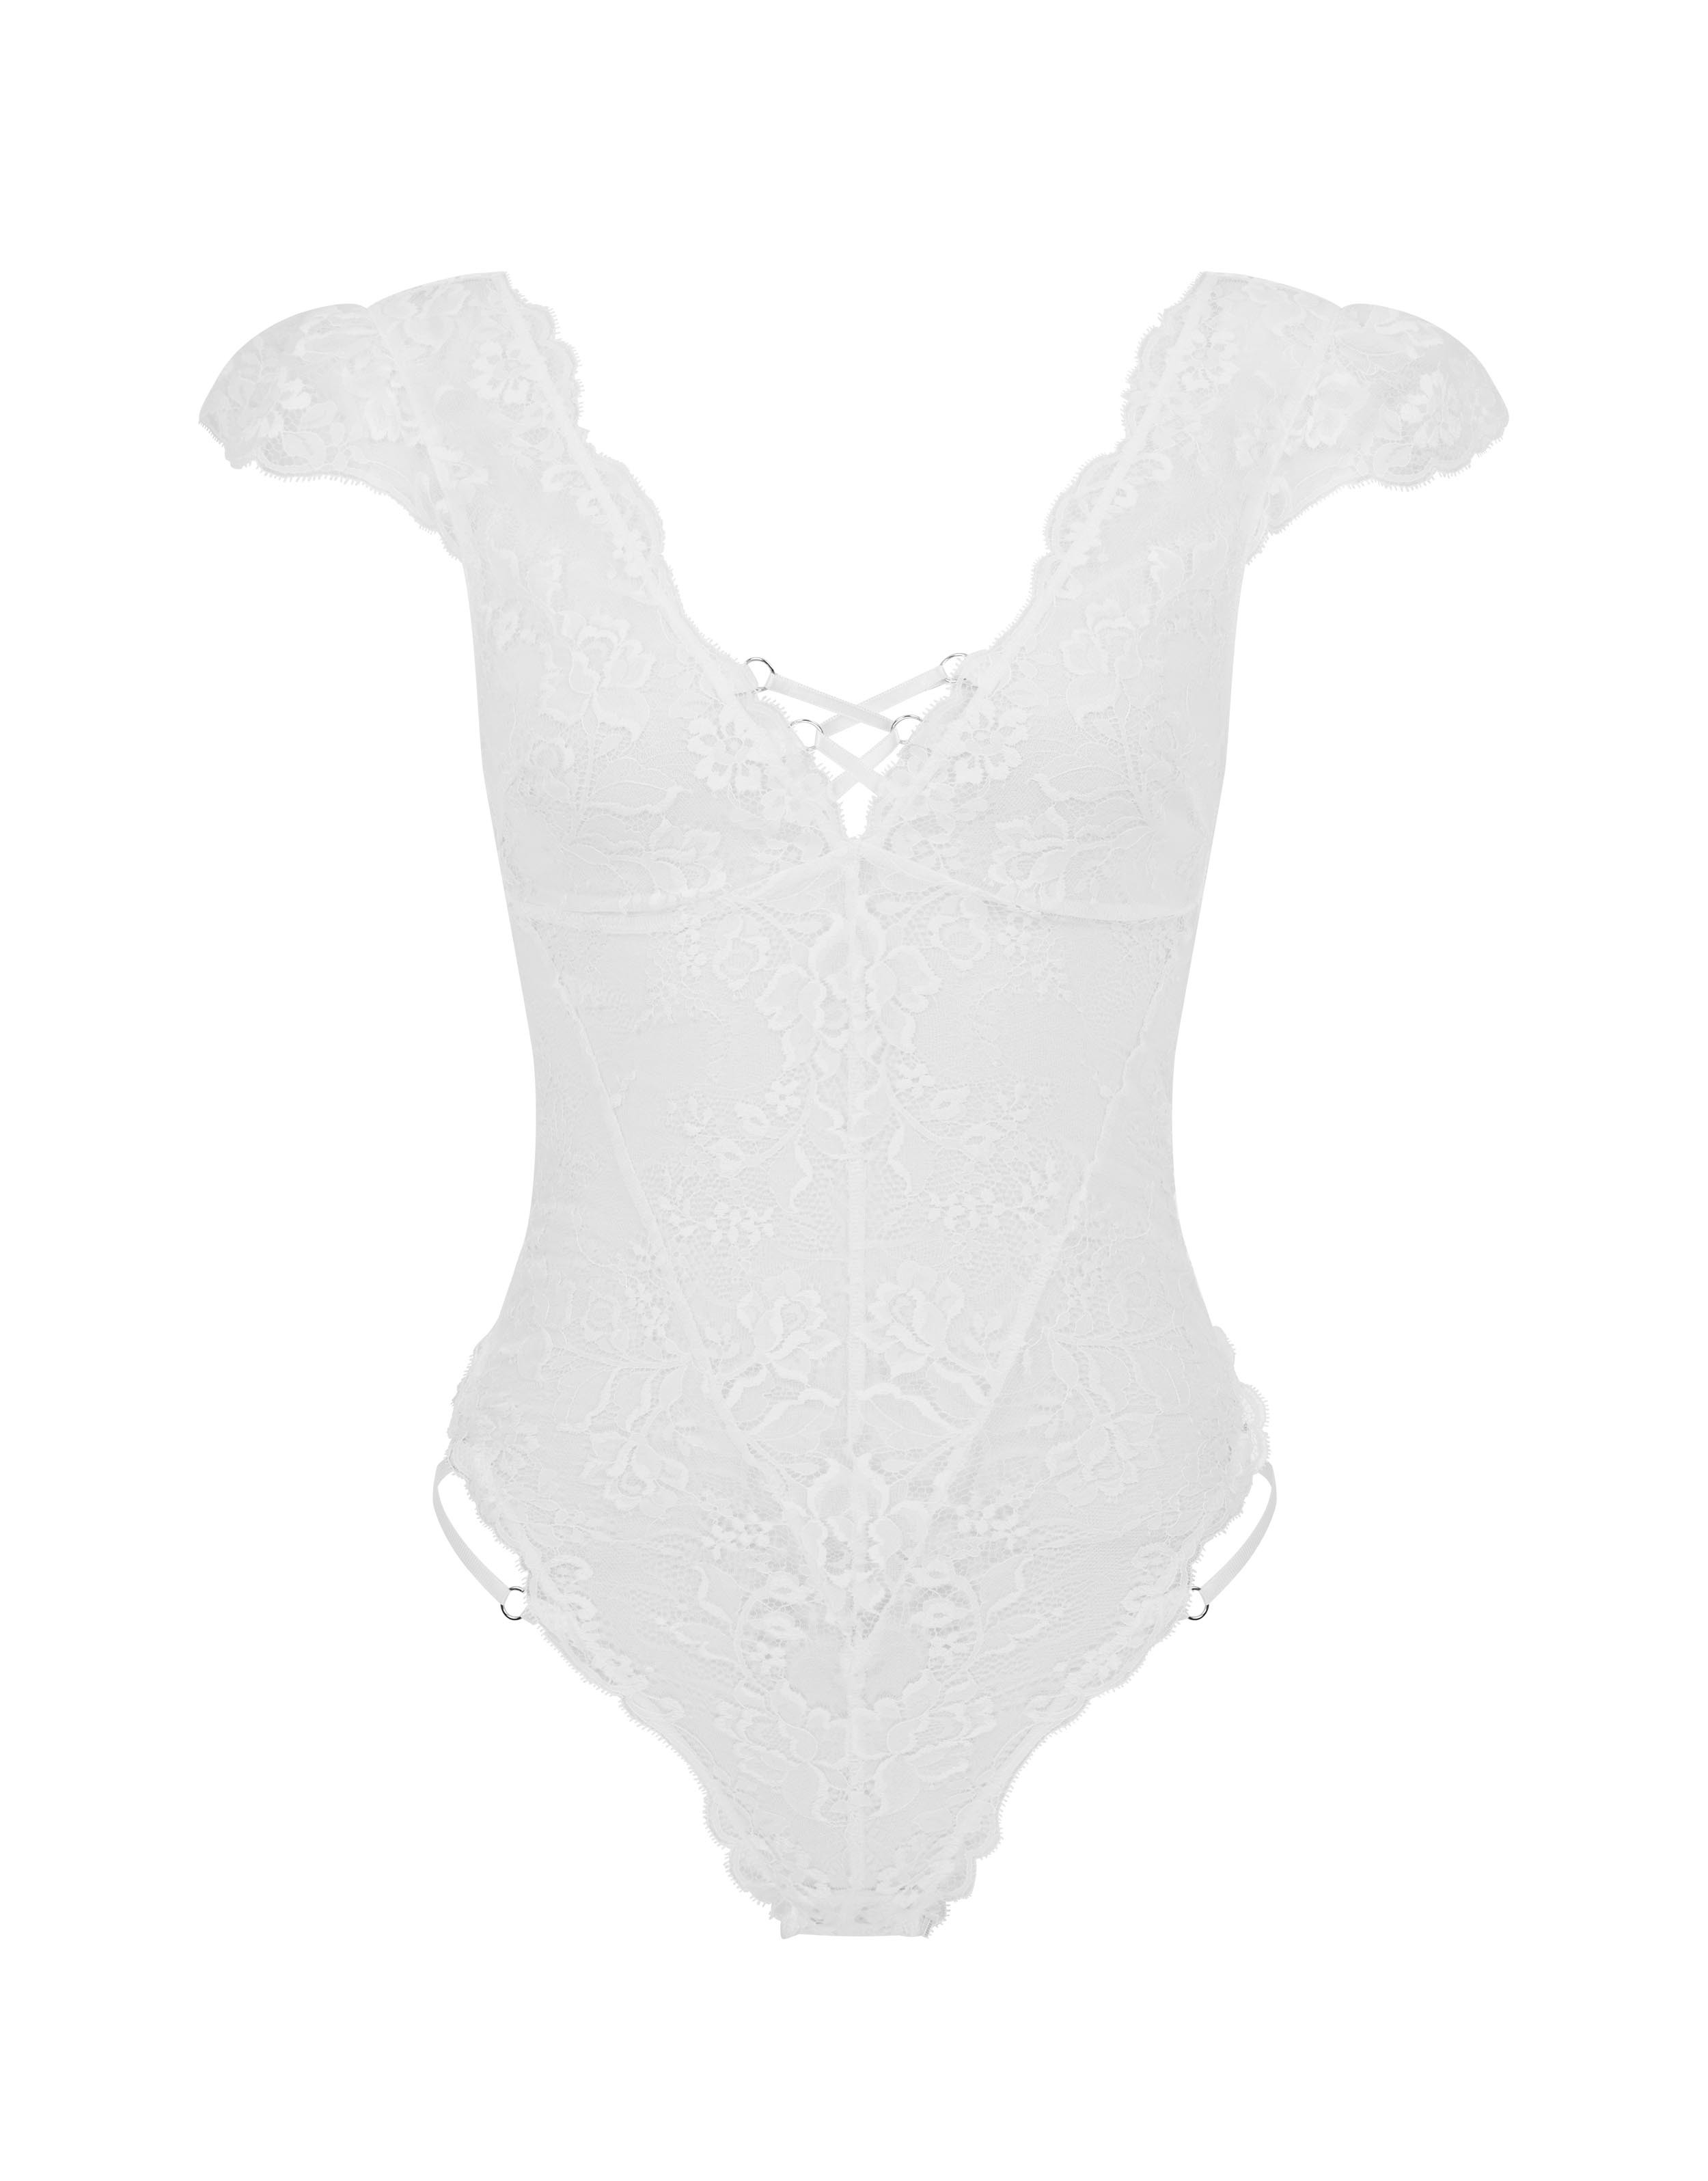 Essie Body in White | Agent Provocateur Outlet